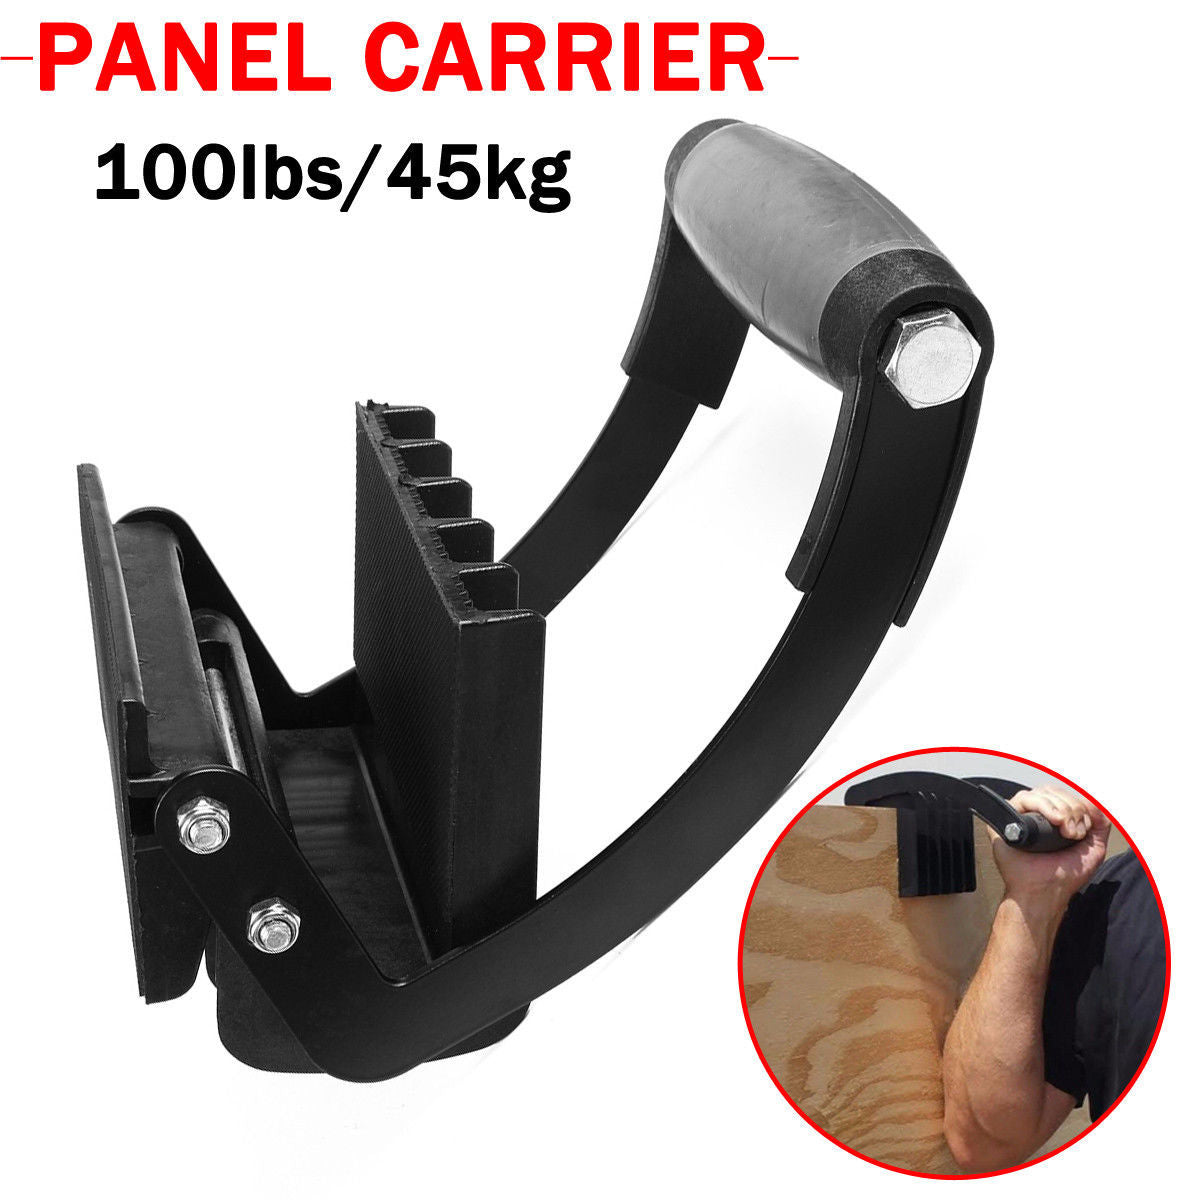 Professional Panel and Plywood Carrier, Plywood Lifting Tool and Drywall Carrying Tool, One Person Drywall Carrier Handle, Single Hand Clamp Lift Tool for Sheet Board, Padded, Drywall